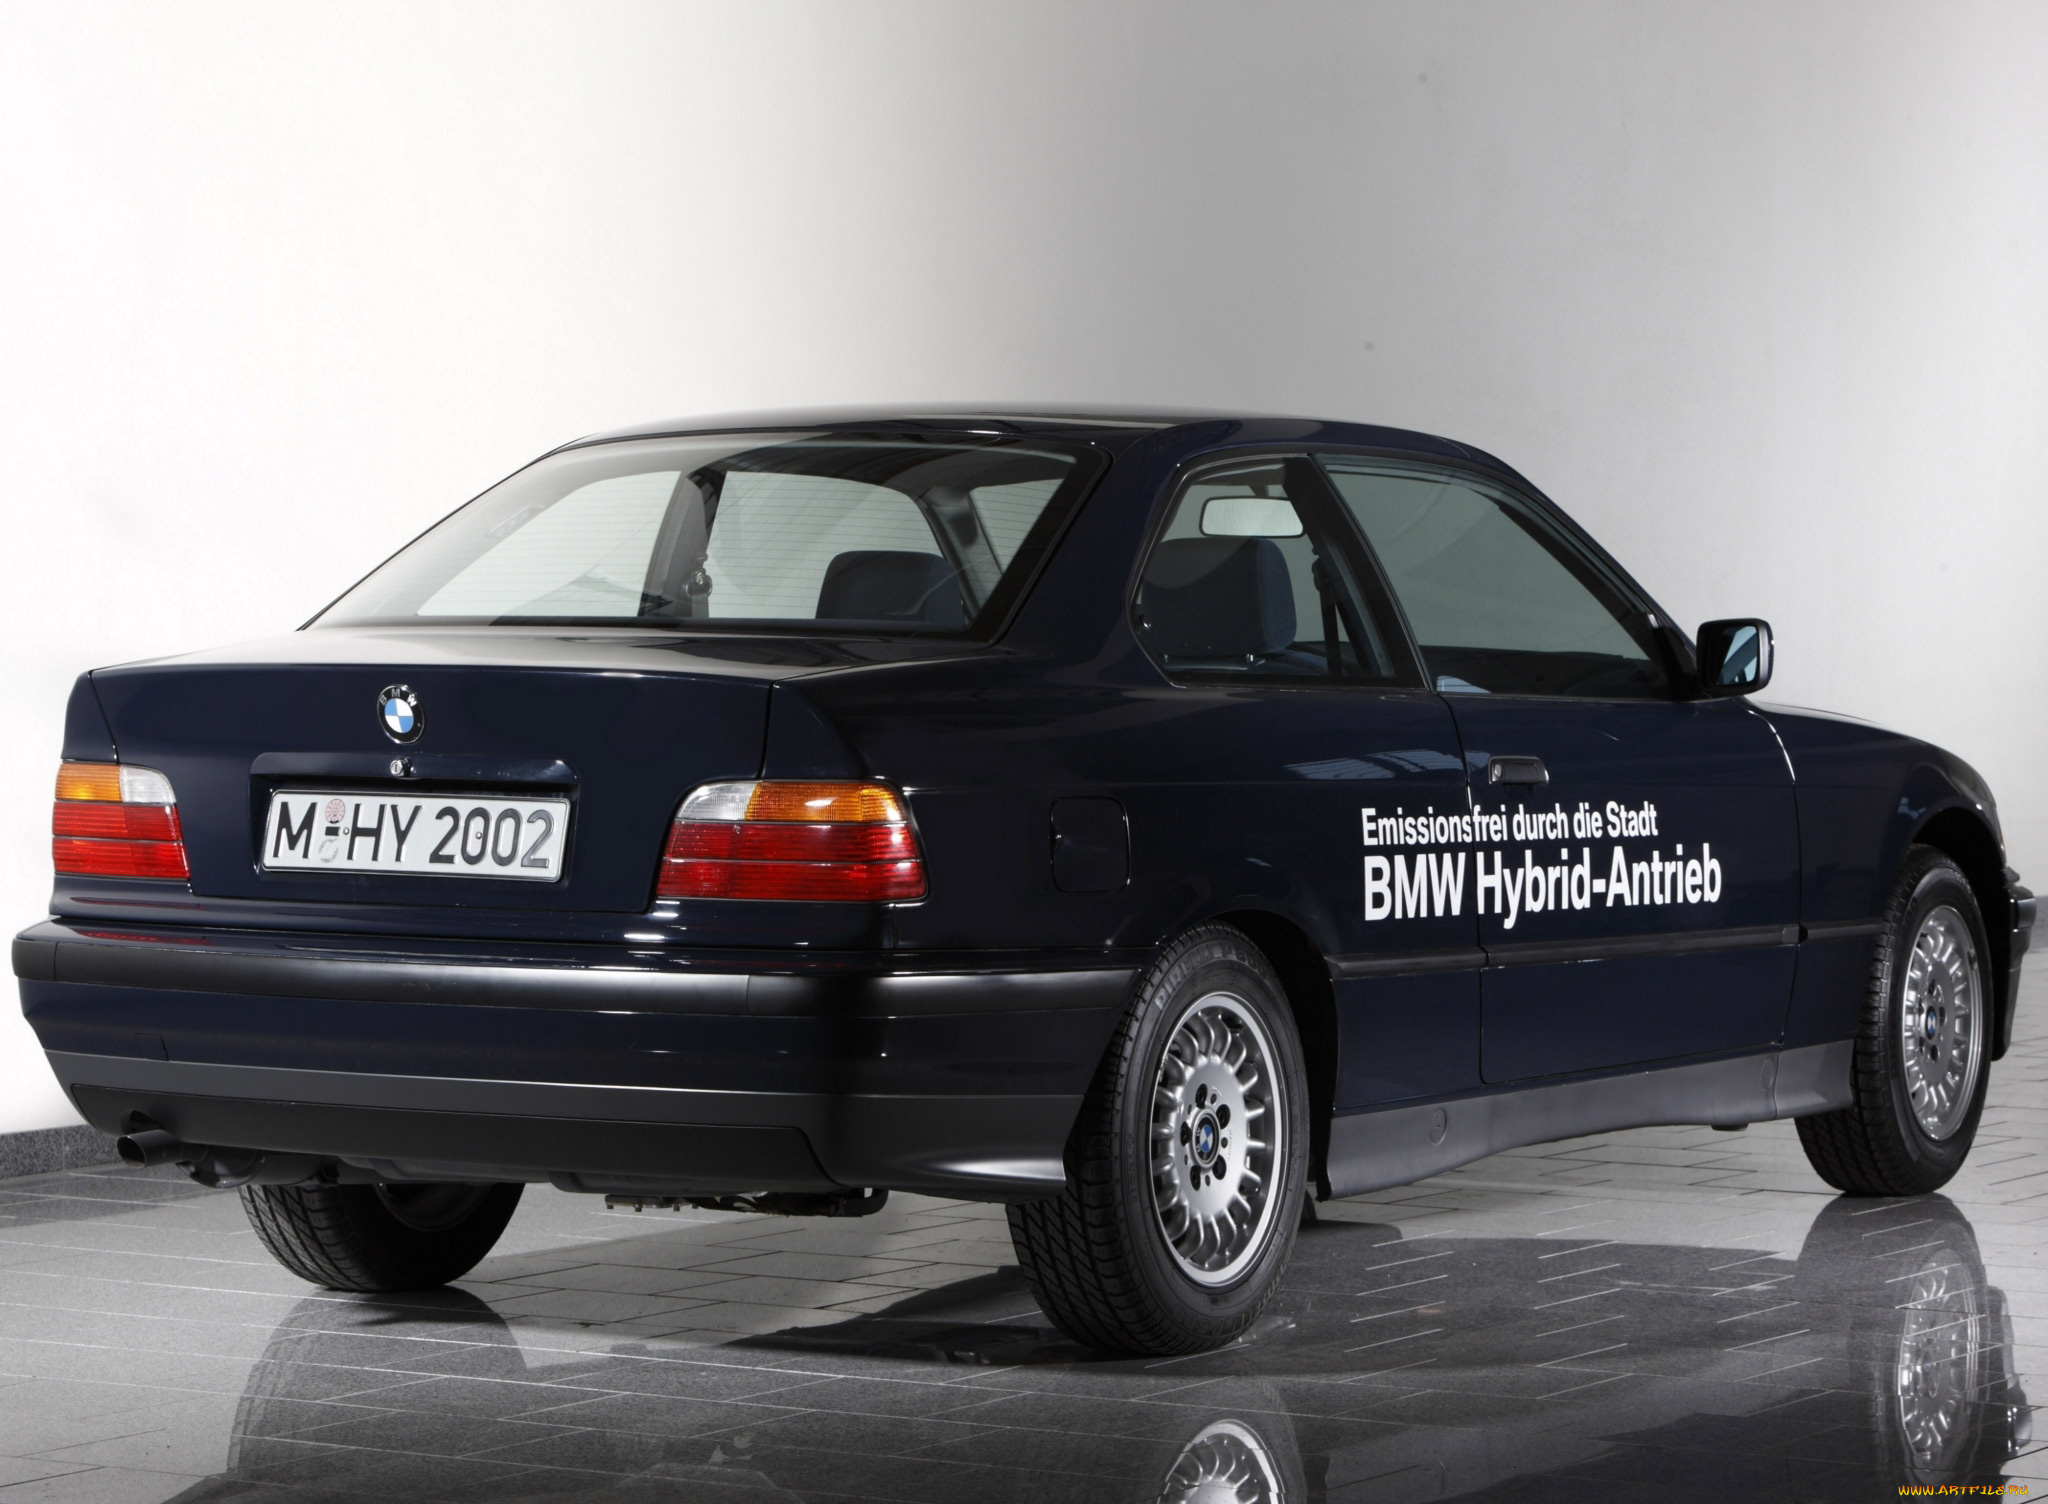 bmw, 3, series, coupe, hybrid, concept, 1994, автомобили, bmw, 3, series, coupe, hybrid, concept, 1994